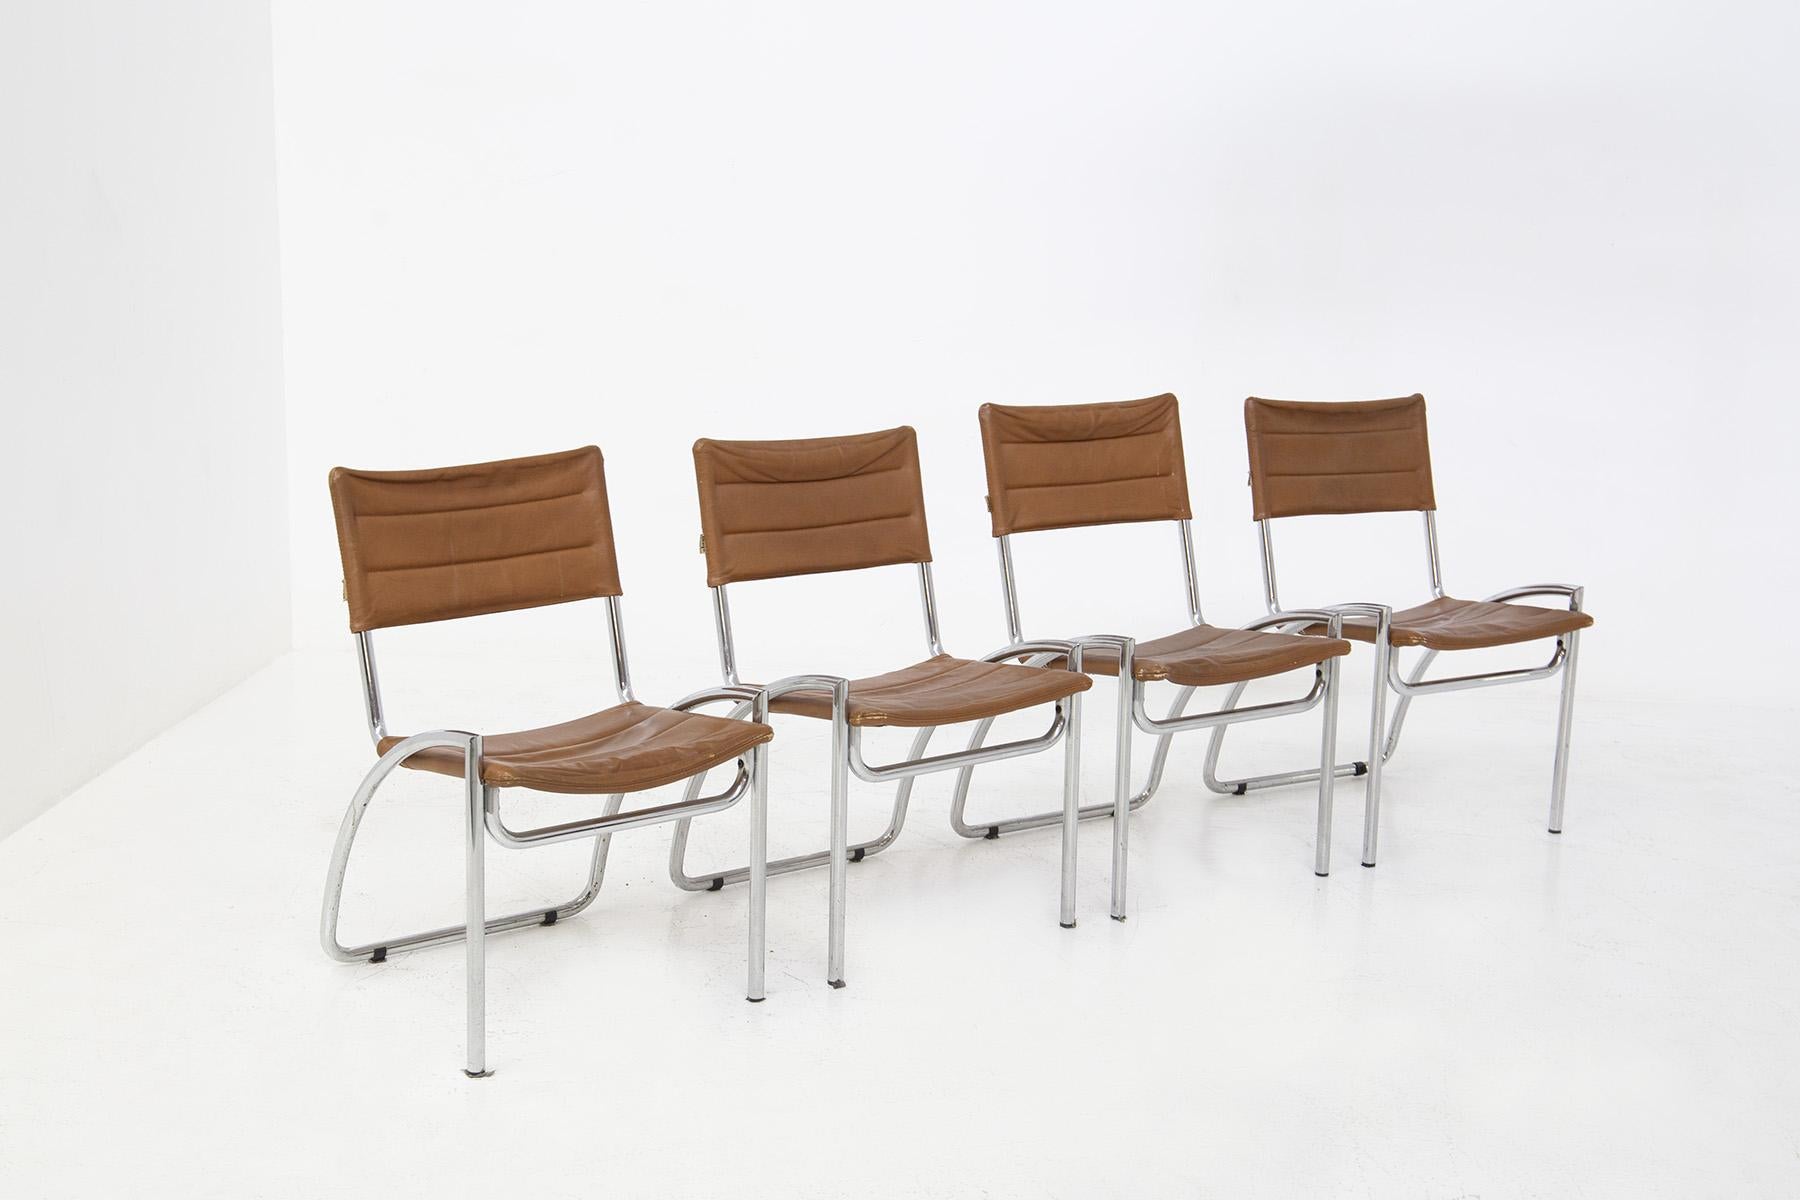 Modern set of four chairs designed by Gae Aulenti for the ELAM manufacture in the 1970s. The chairs are the very rare LIRA model. The chair set is made with a curved chrome metal frame that makes the seat energetic bright. Its modern curved lines